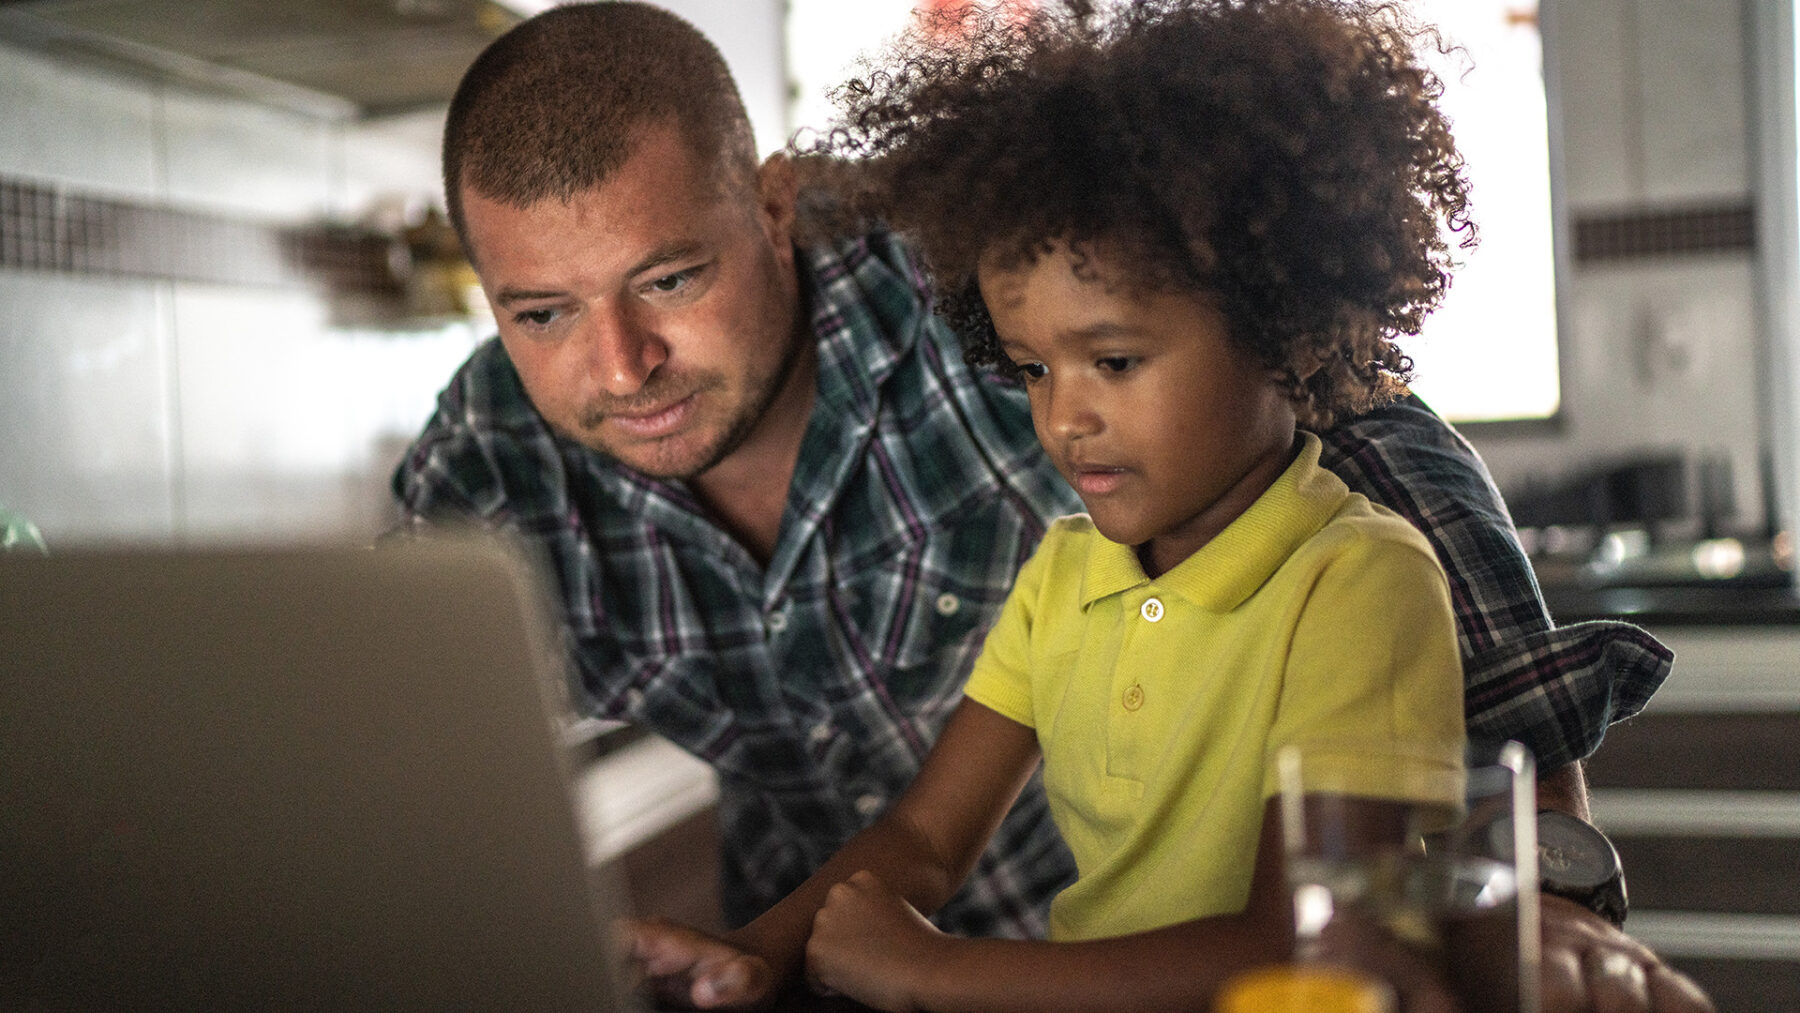 A man helping a child on a laptop